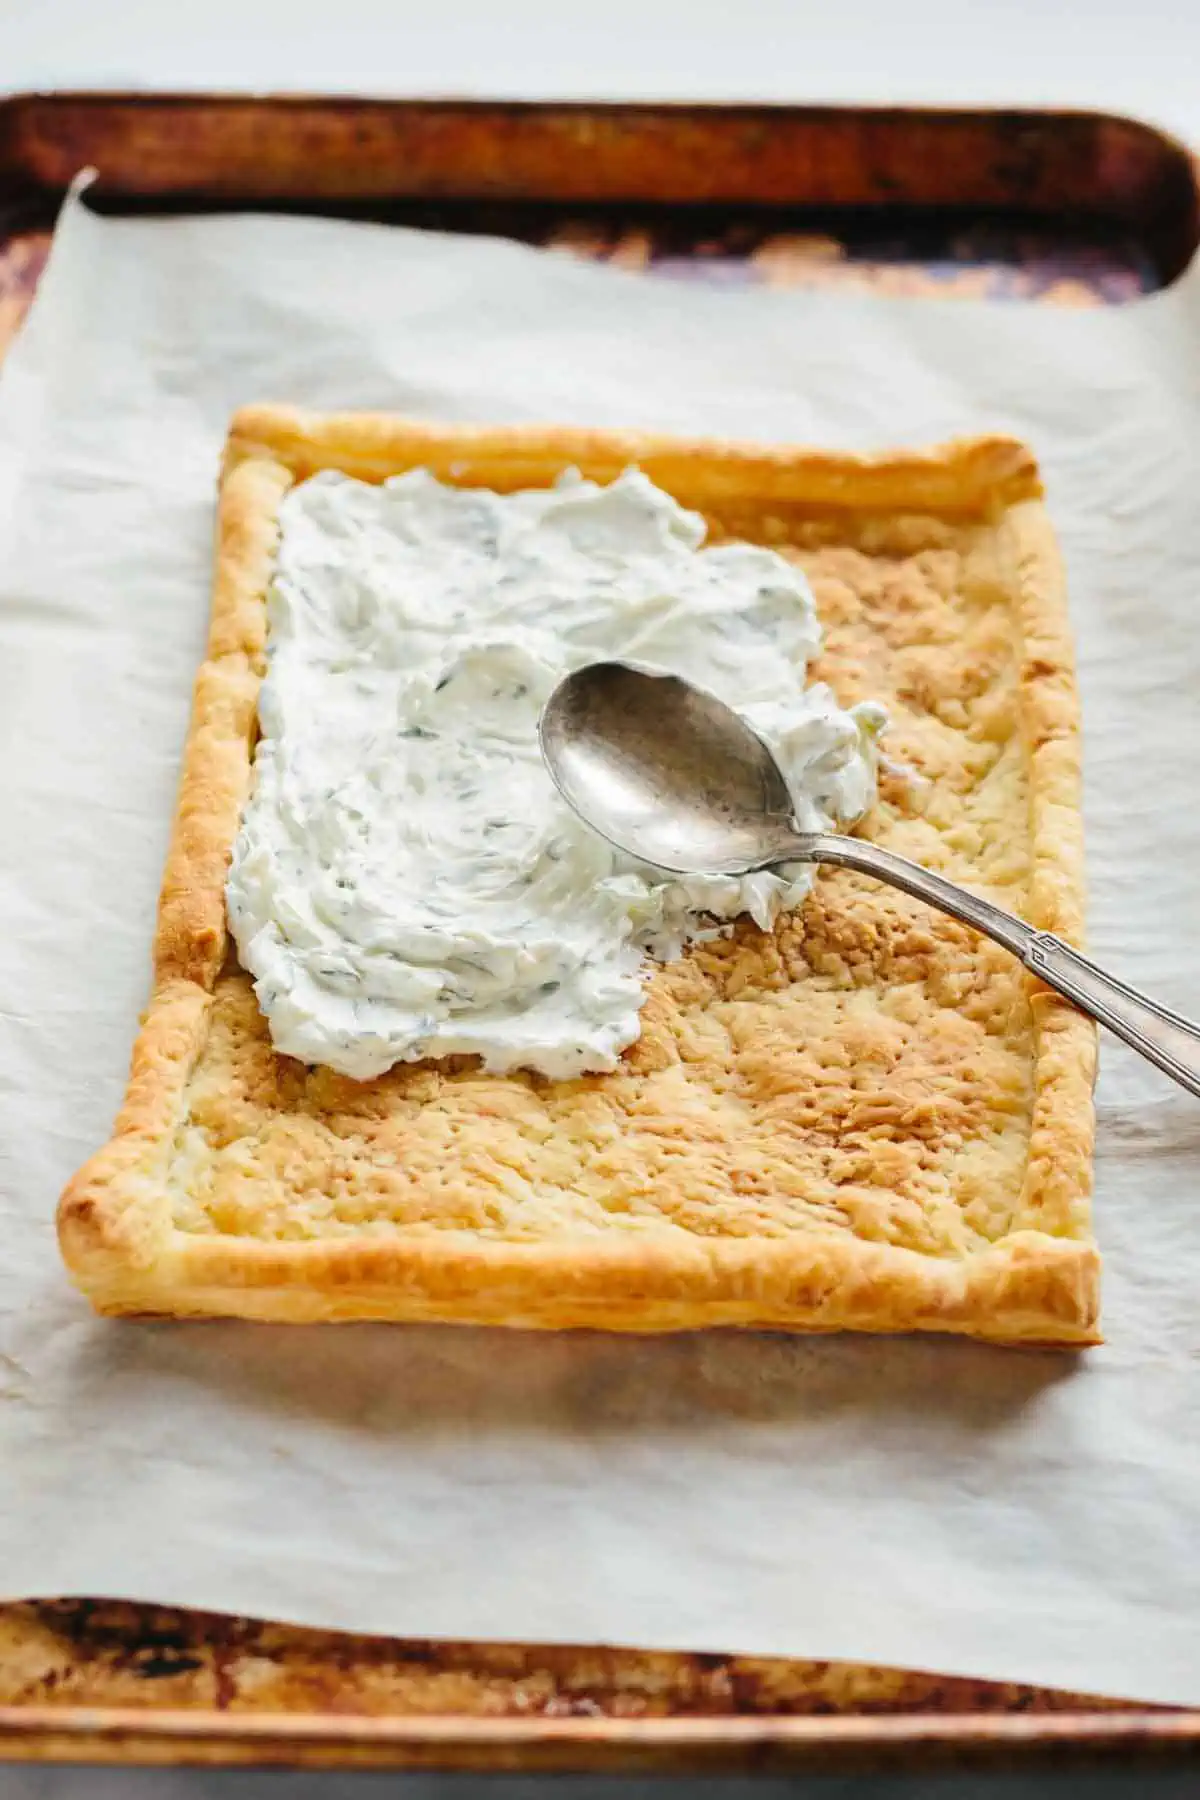 Spreading cream cheese on baked puff pastry.